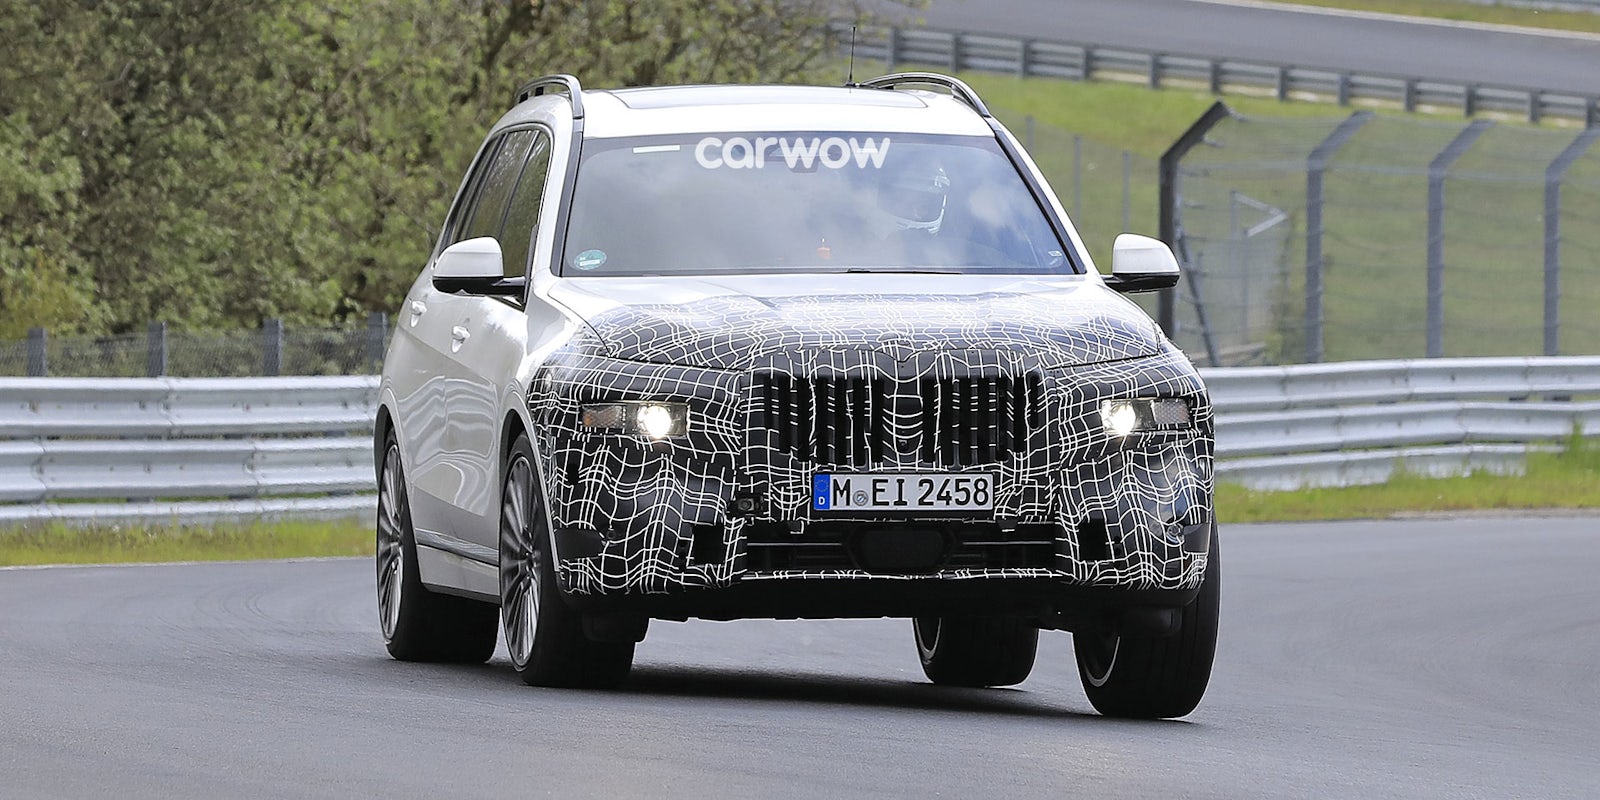 New 2022 Bmw X7 Facelift Spotted Price Specs And Release Date Carwow